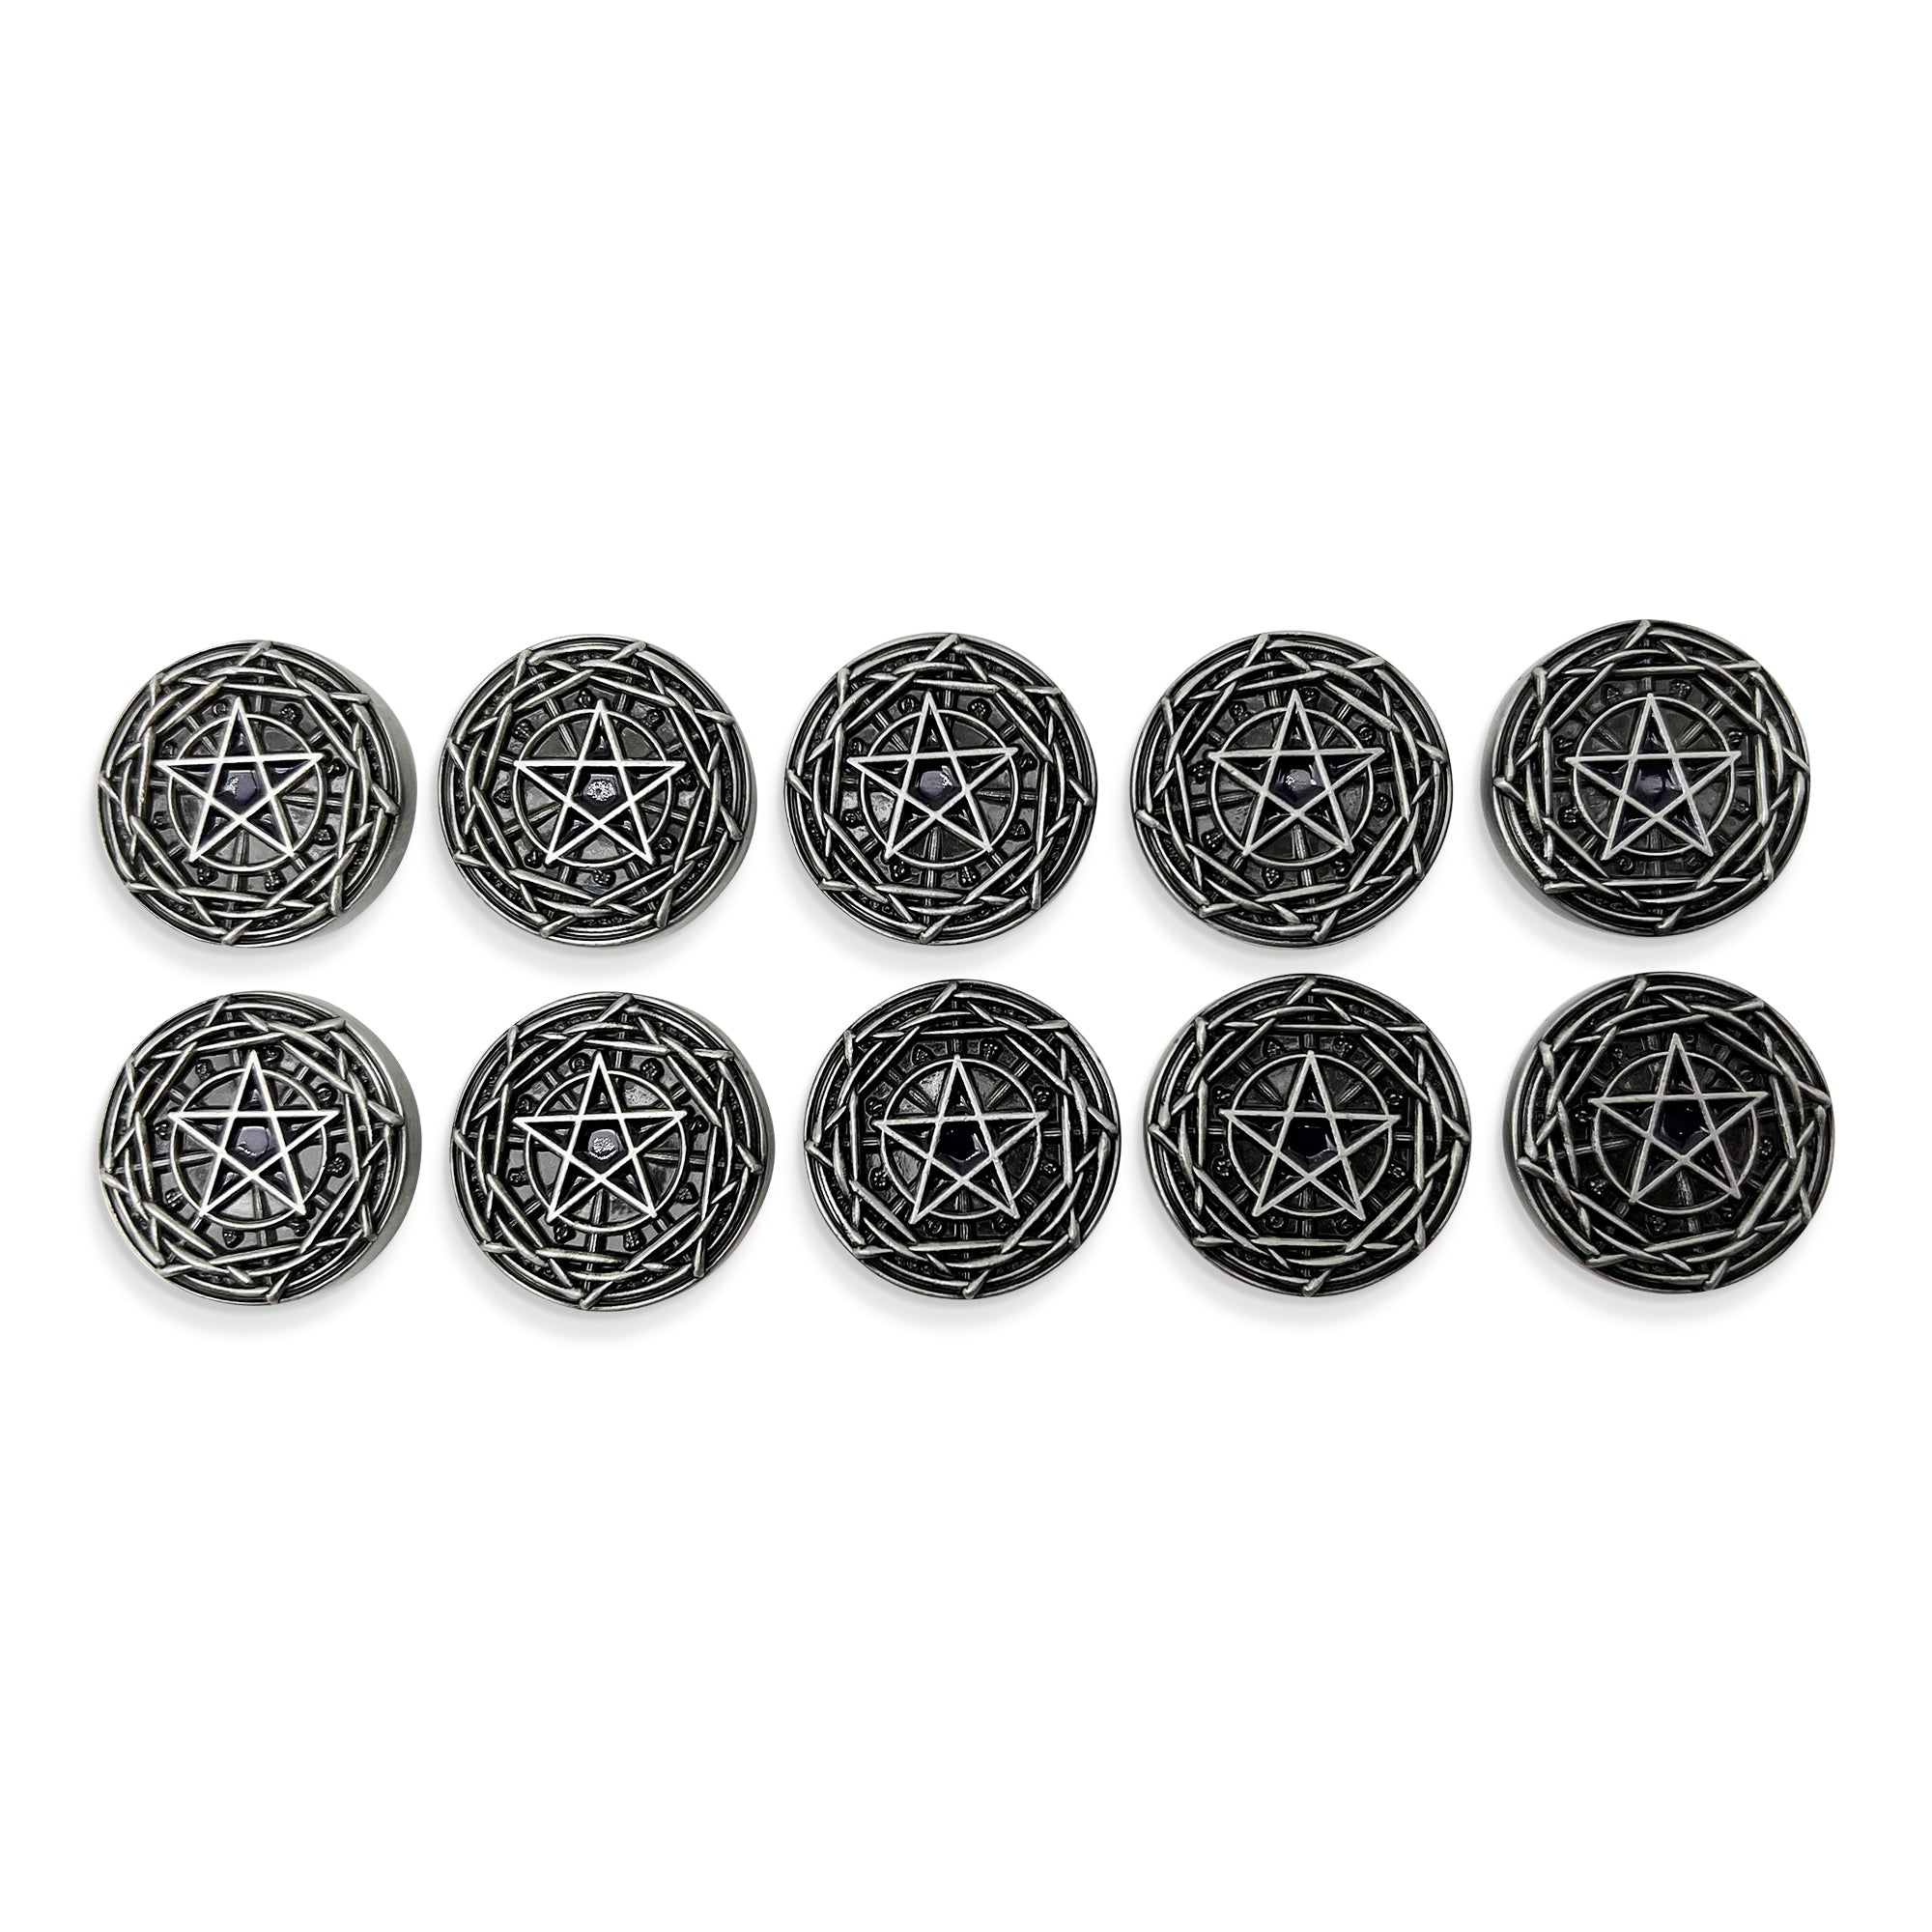 Profession Coins - Warlock Metal Coins Set of 10